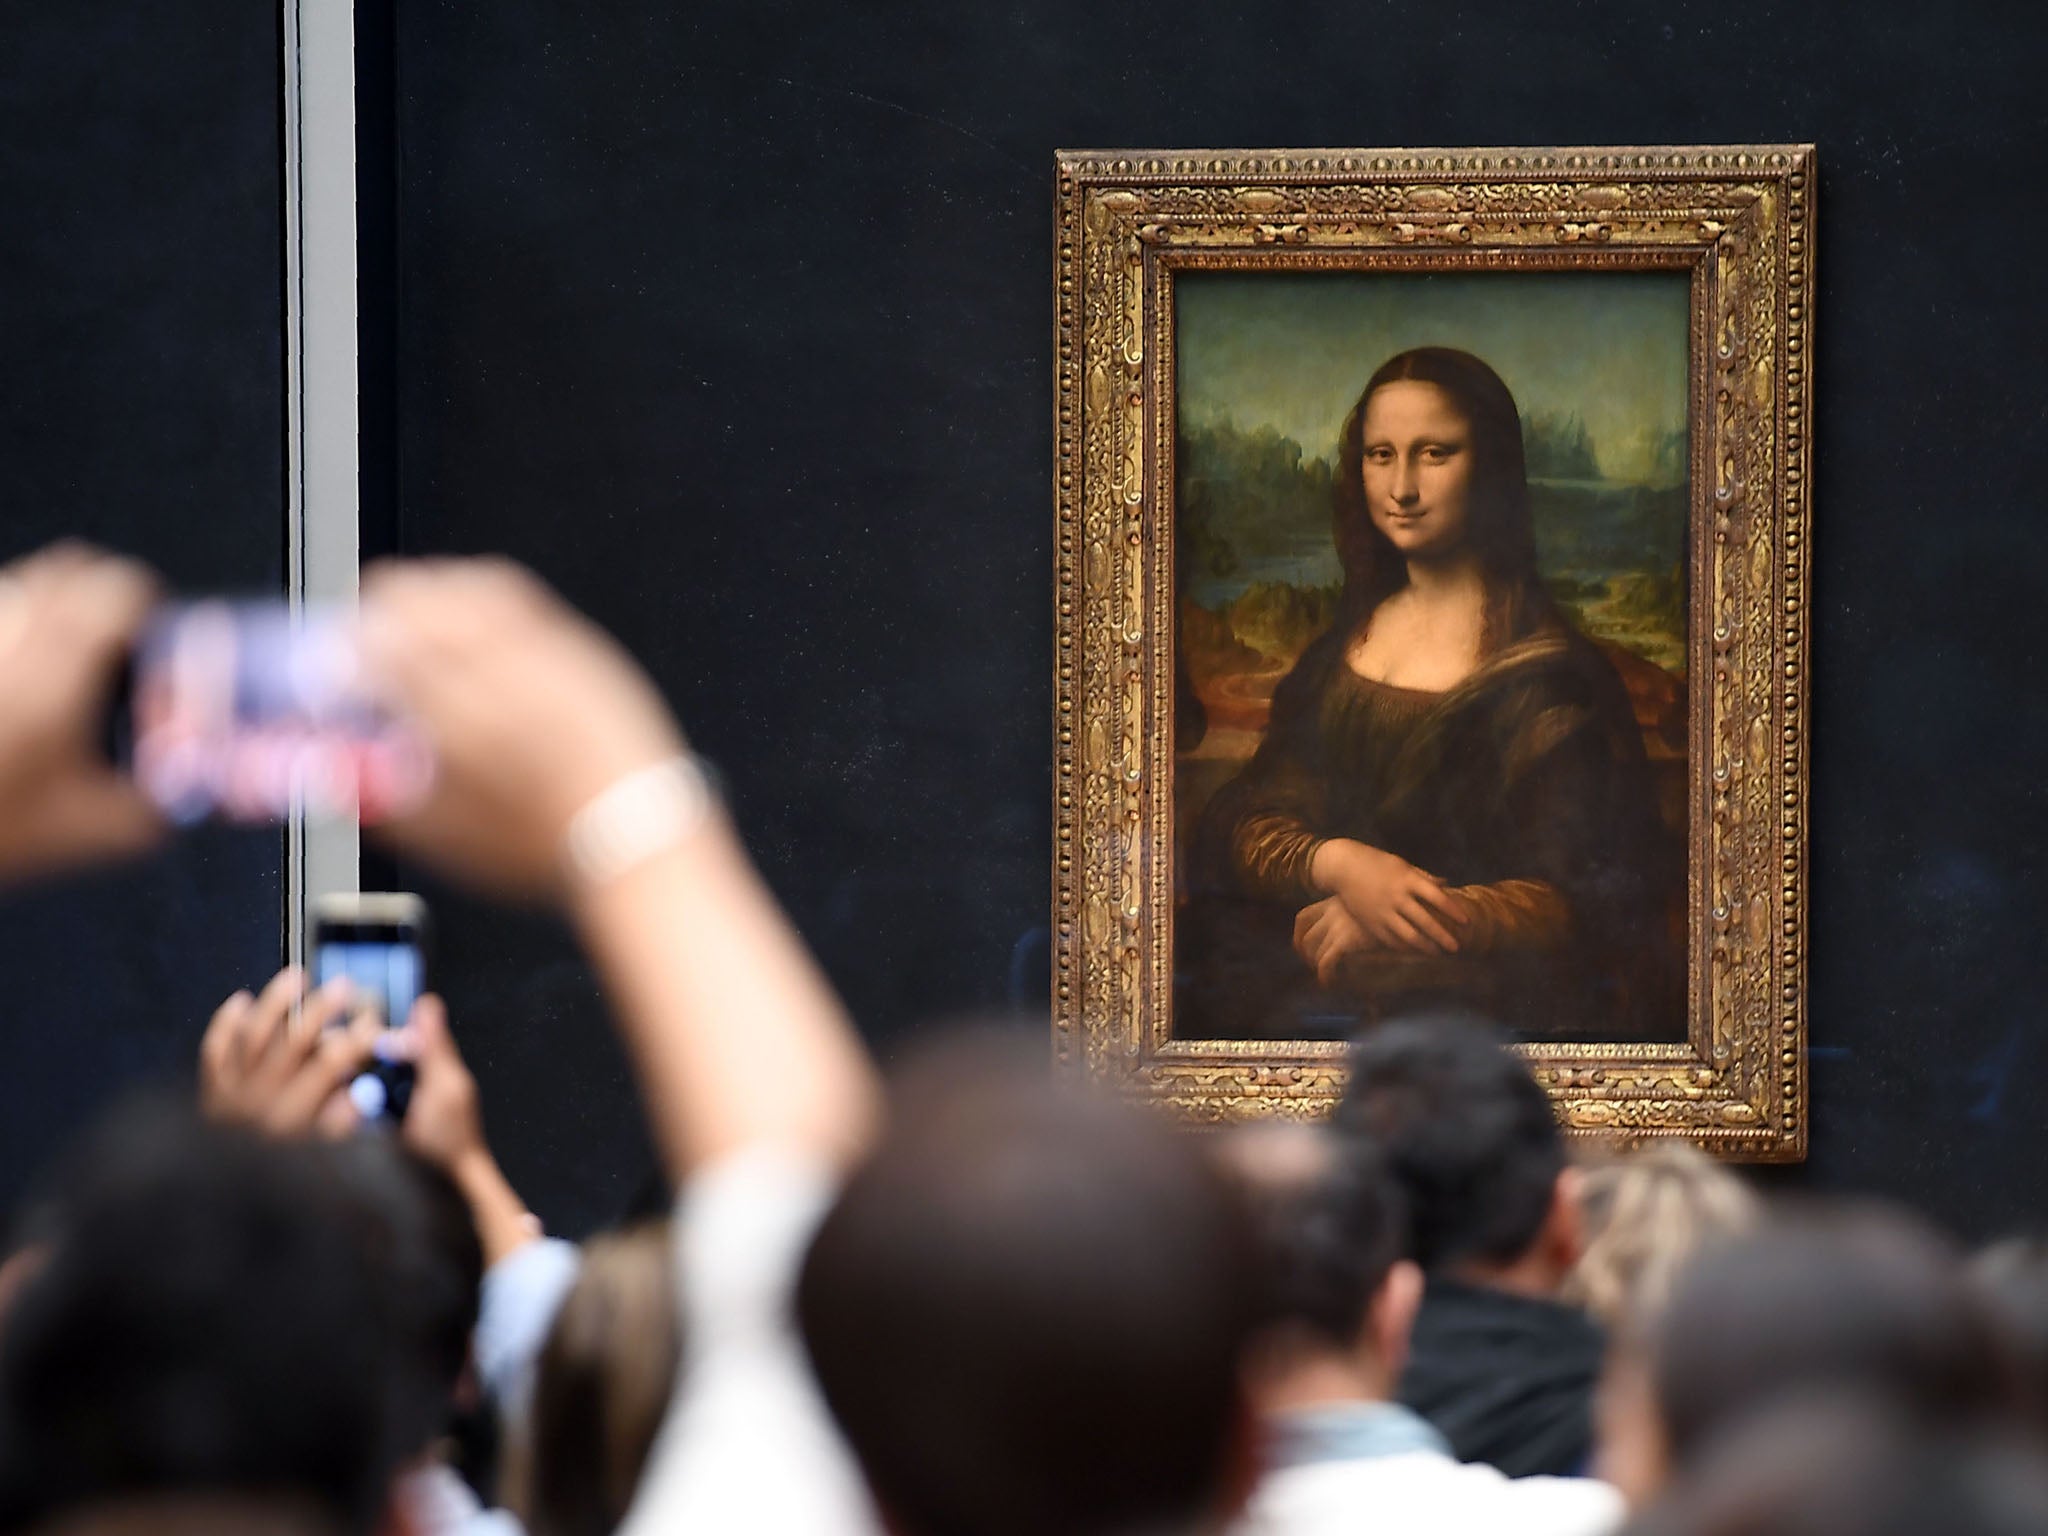 The Mona Lisa in virtual reality in your own home